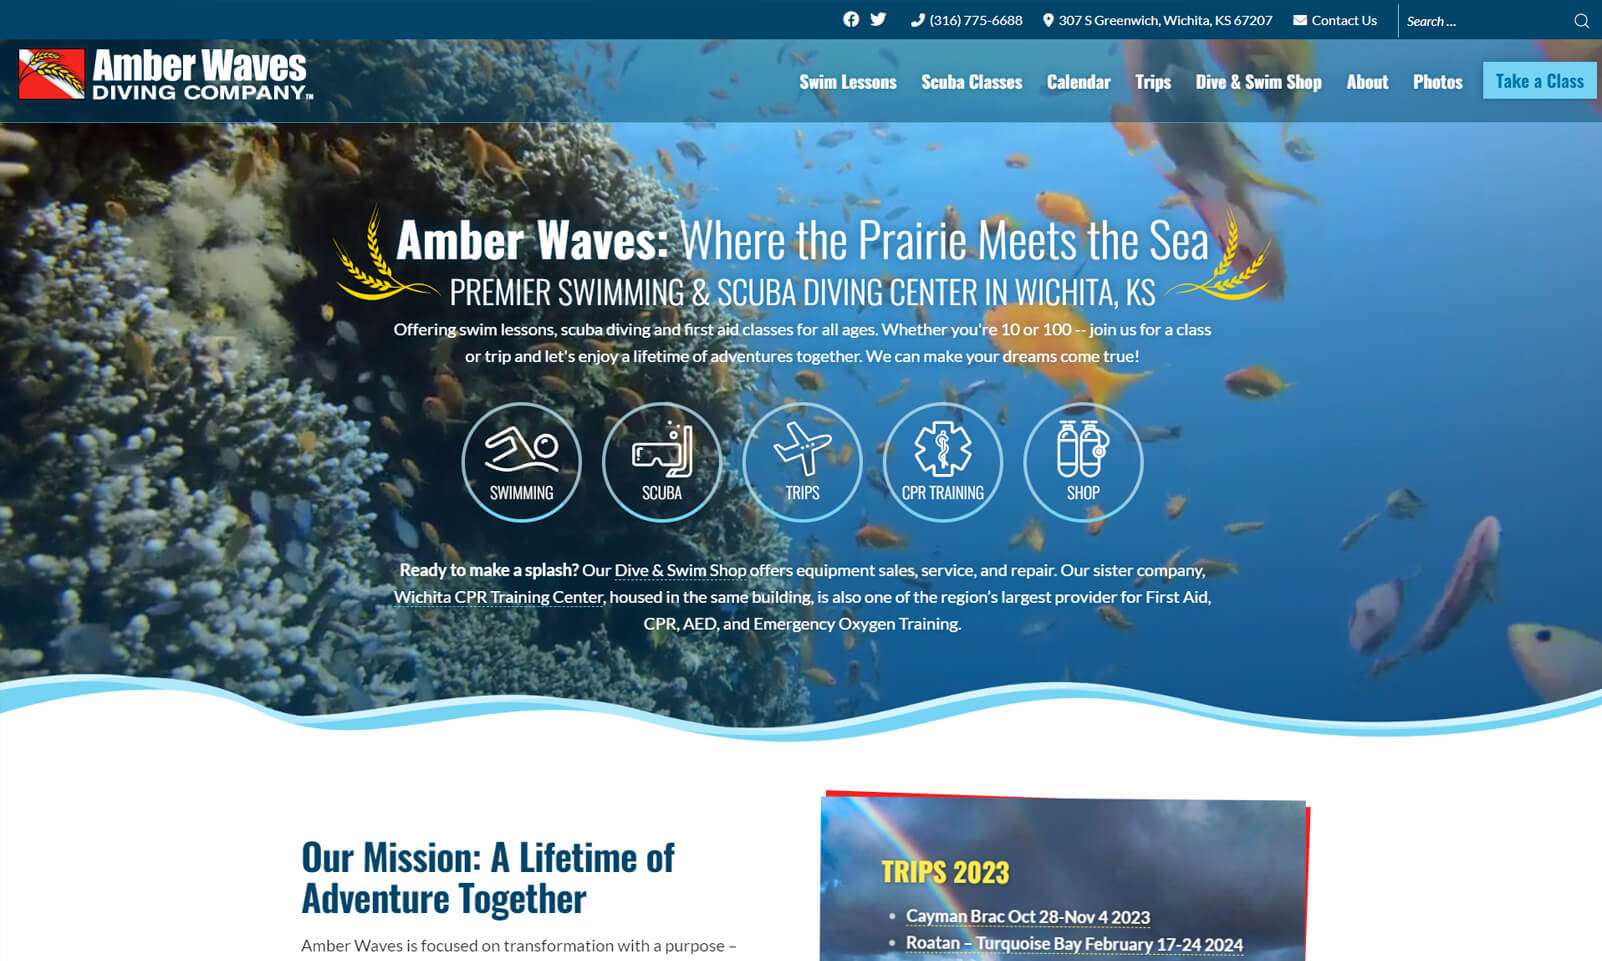 Amber Waves Diving Co. New Website by Lee Media Group